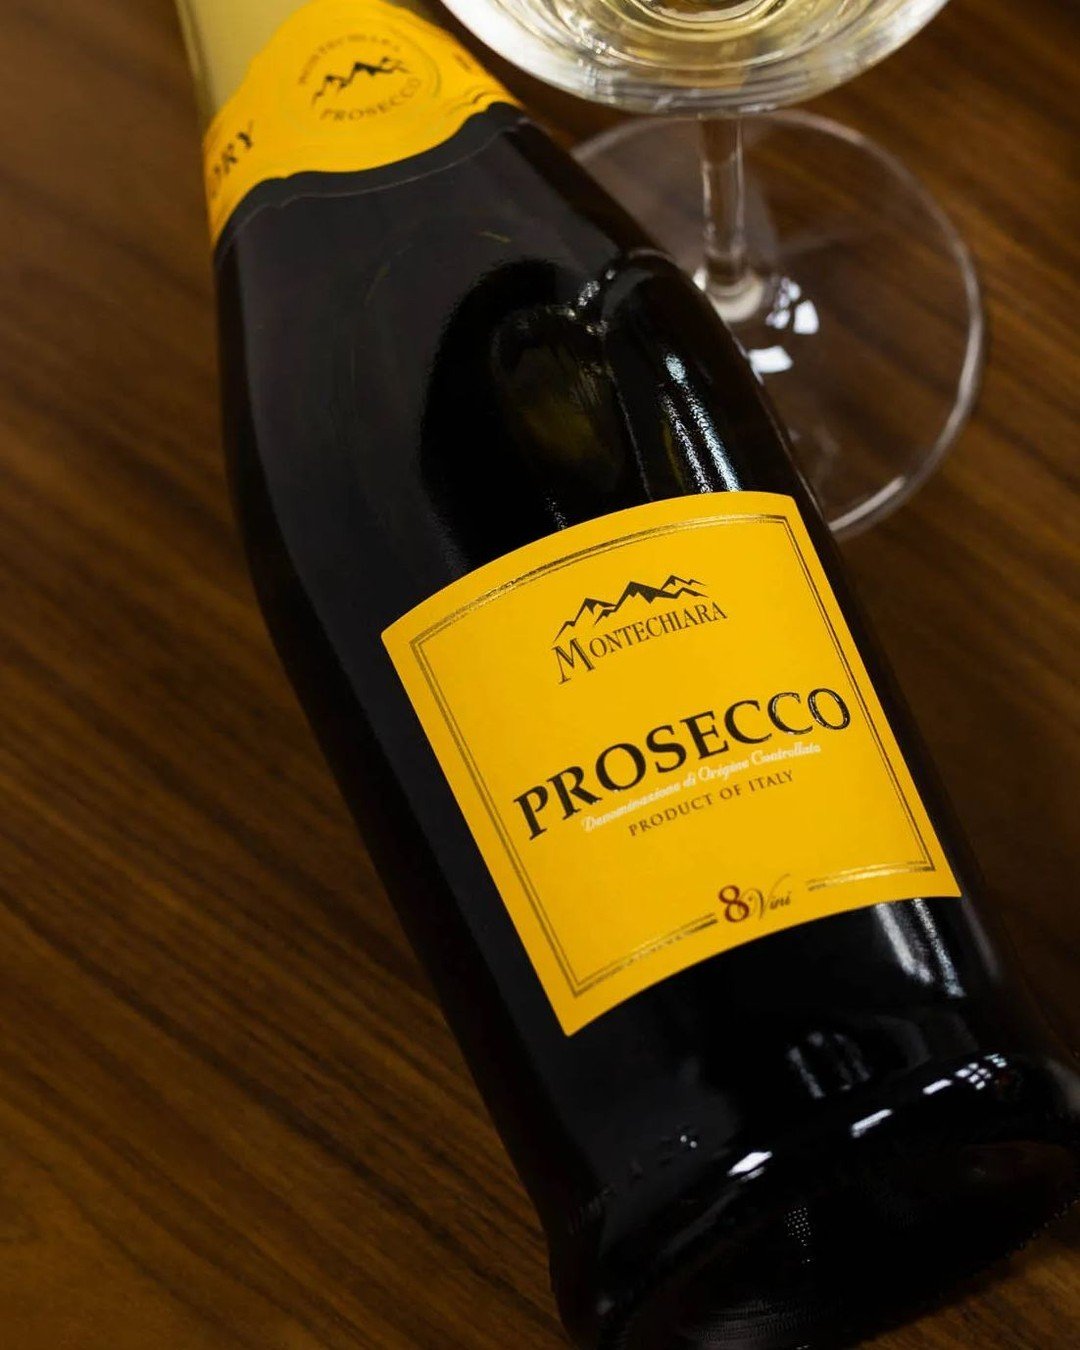 🍾 Nothing pairs better with sunshine than a chilled glass of Montechiara Prosecco with its dry, crisp, well-balanced elegance and the joyous play of floral aromas and white peach notes that dance on your palate. 
. 
The creamy entry and long, dry fi